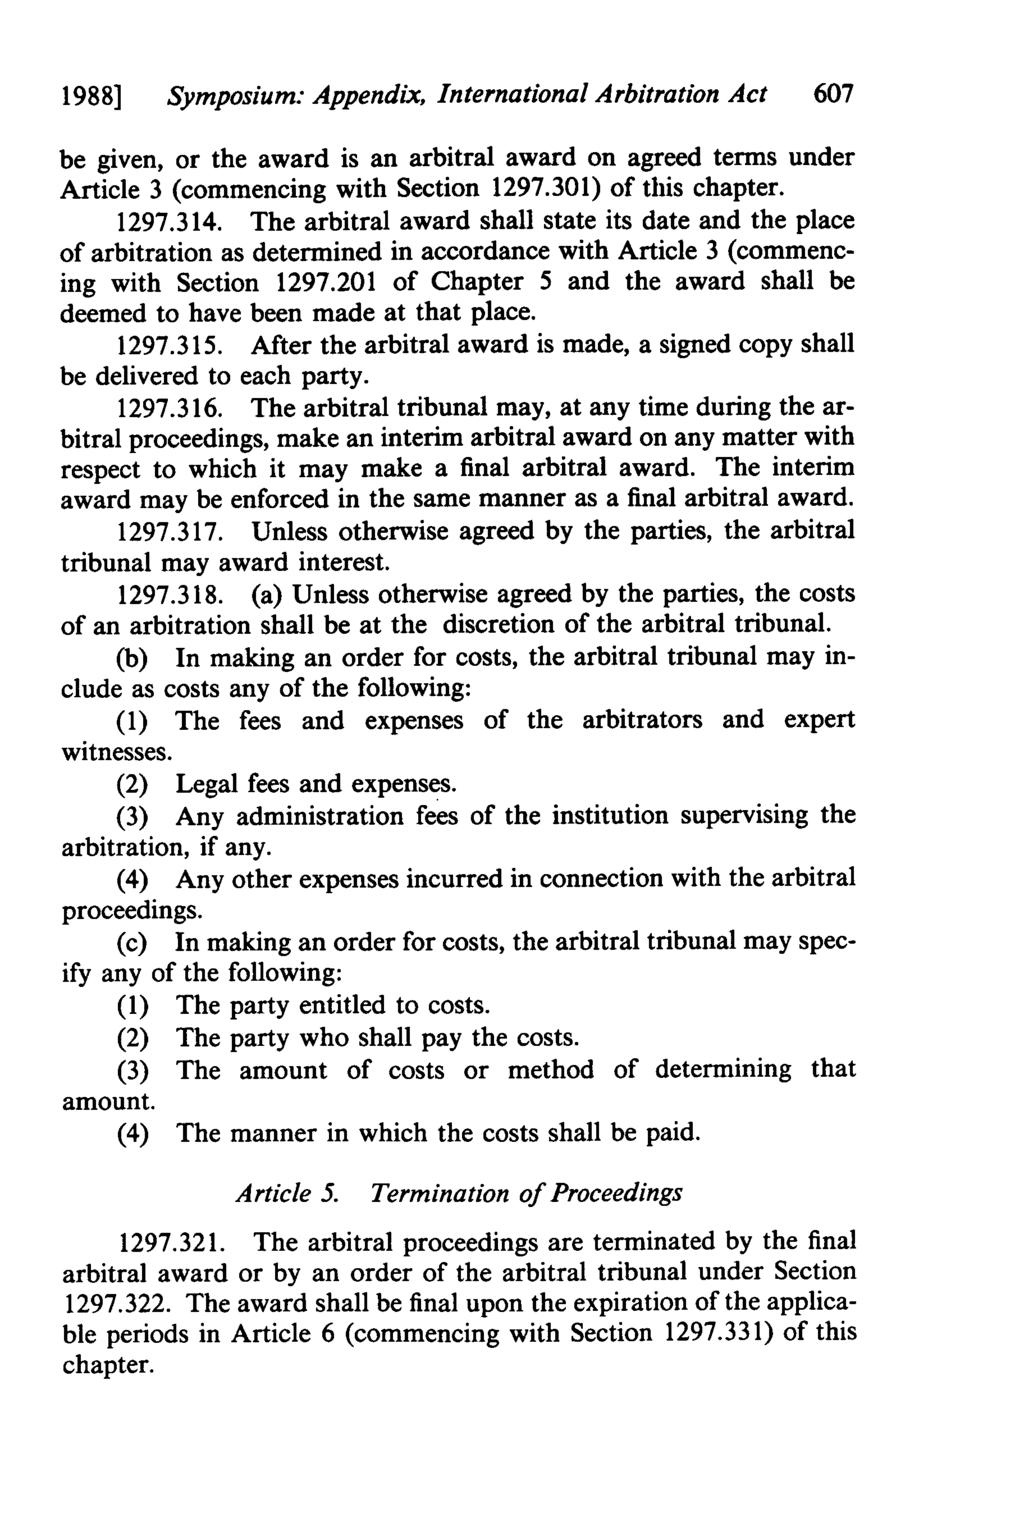 1988] Symposium: Appendix, International Arbitration Act 607 be given, or the award is an arbitral award on agreed terms under Article 3 (commencing with Section 1297.301) of this chapter. 1297.314.